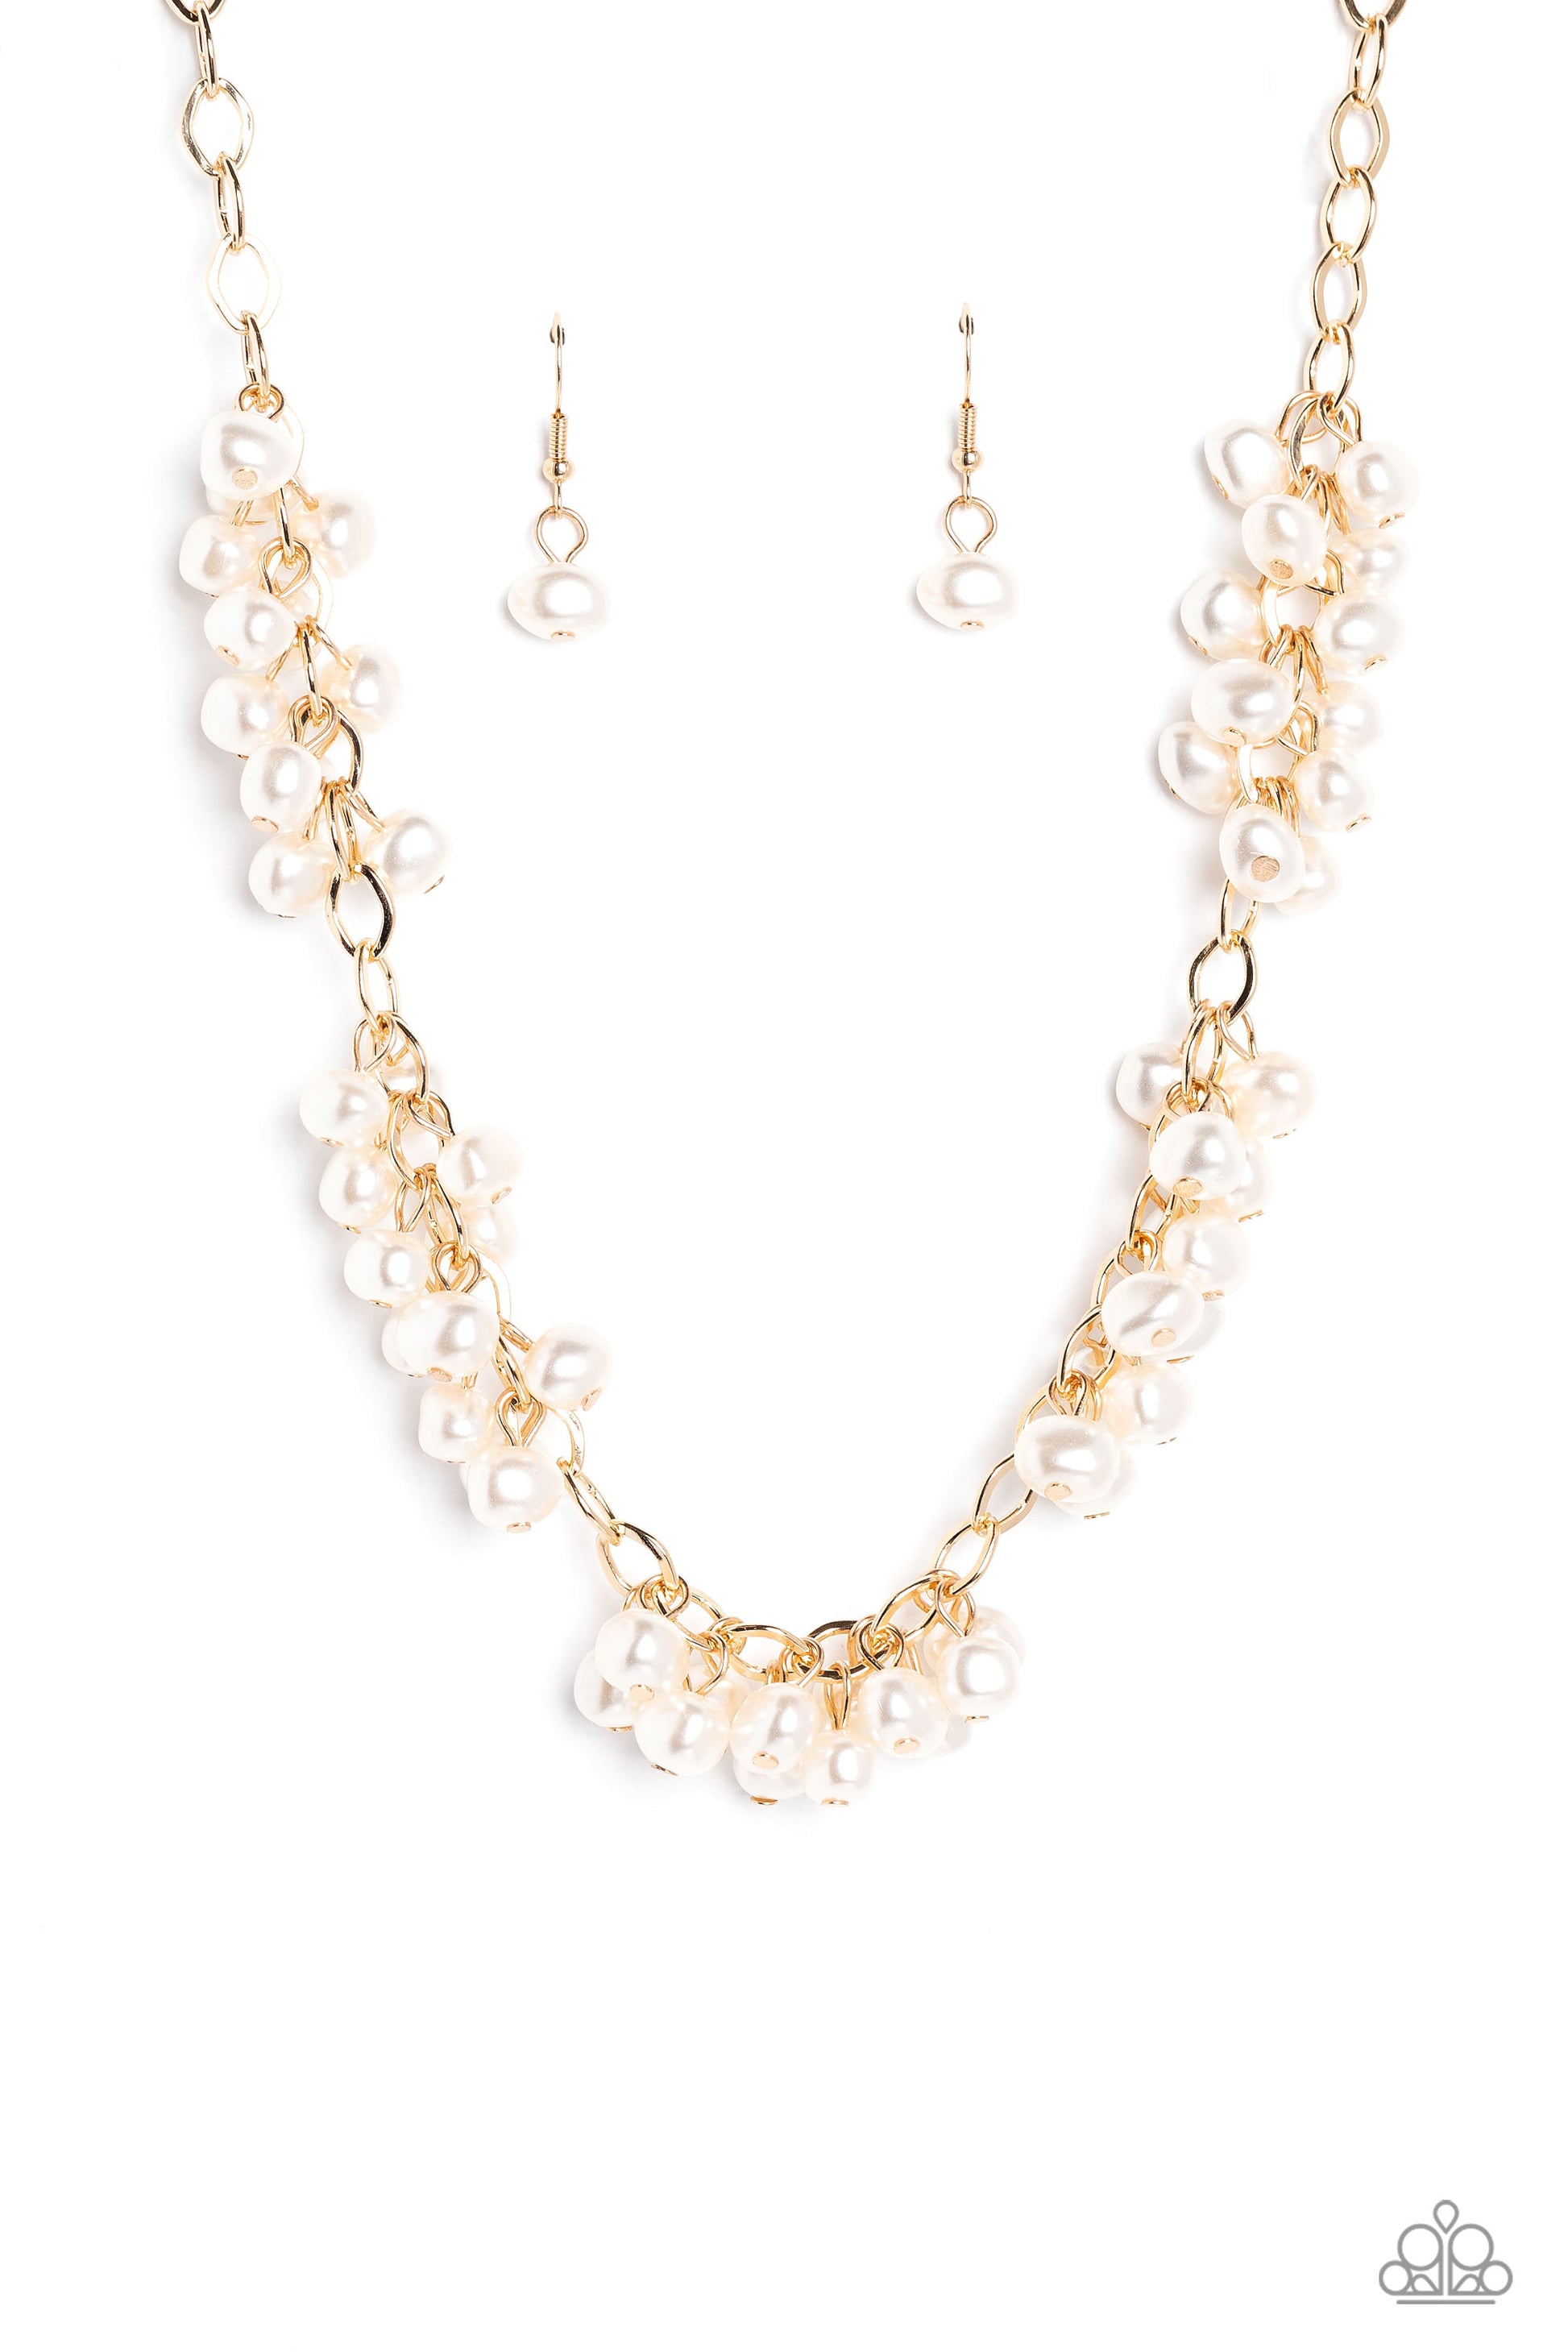 Paparazzi Accessories - Pearl Parlor - Gold Pearl Necklaces a cascade of classic white pearly beads dangle from a high-sheen gold, oval linked chain. The pearly beads cluster across the neckline, creating a refined pop of color. Features an adjustable clasp closure.  Sold as one individual necklace. Includes one pair of matching earrings.